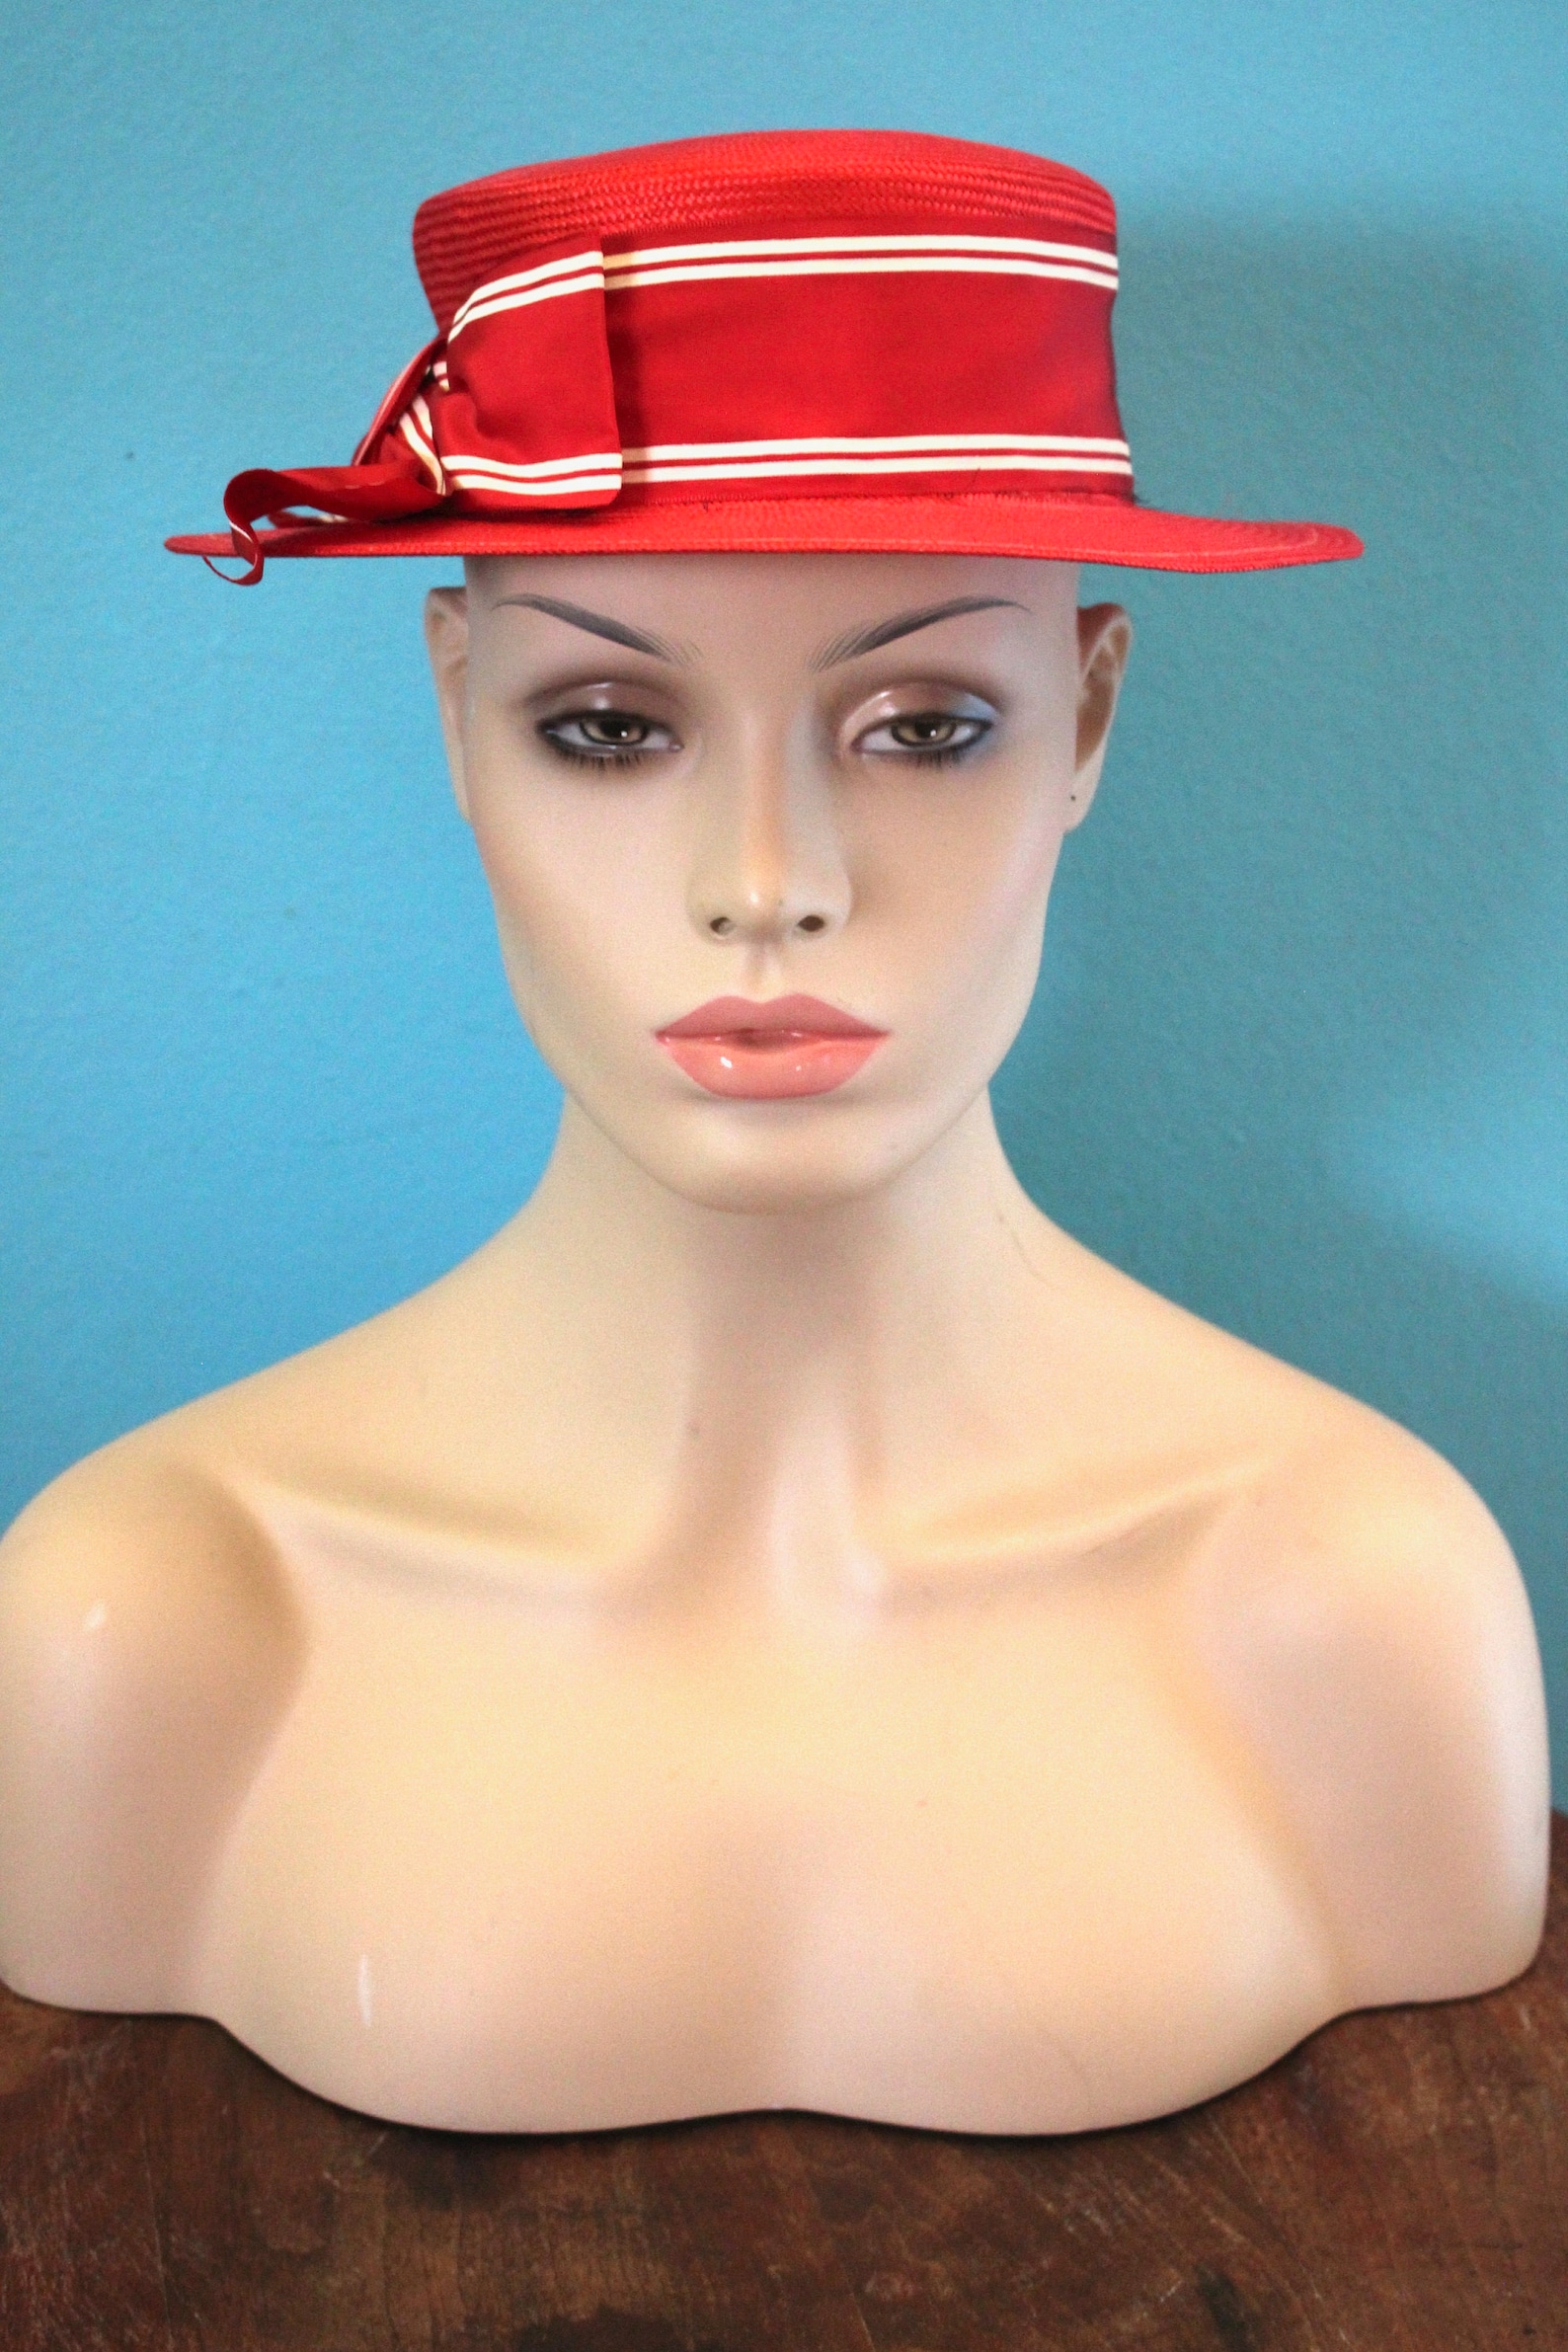 80's Women's Hat 1980's Cherry Red Straw Boater - Etsy